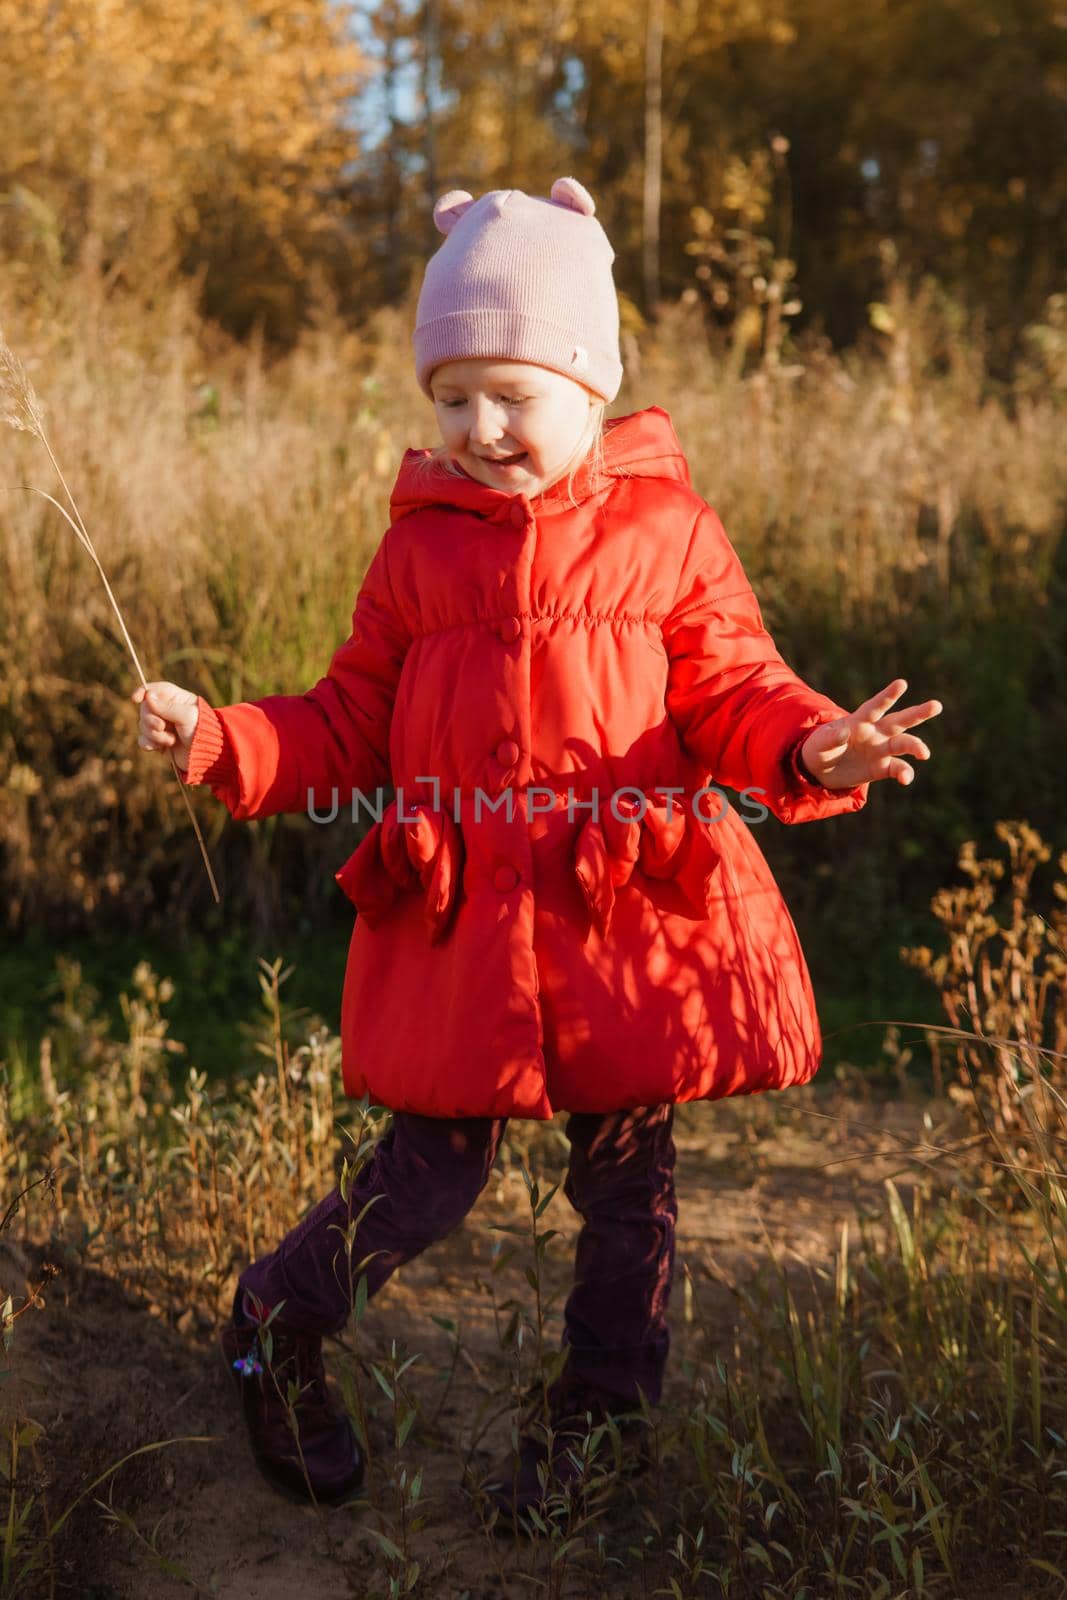 A little girl in a red coat walks in nature in an autumn grove. The season is autumn.